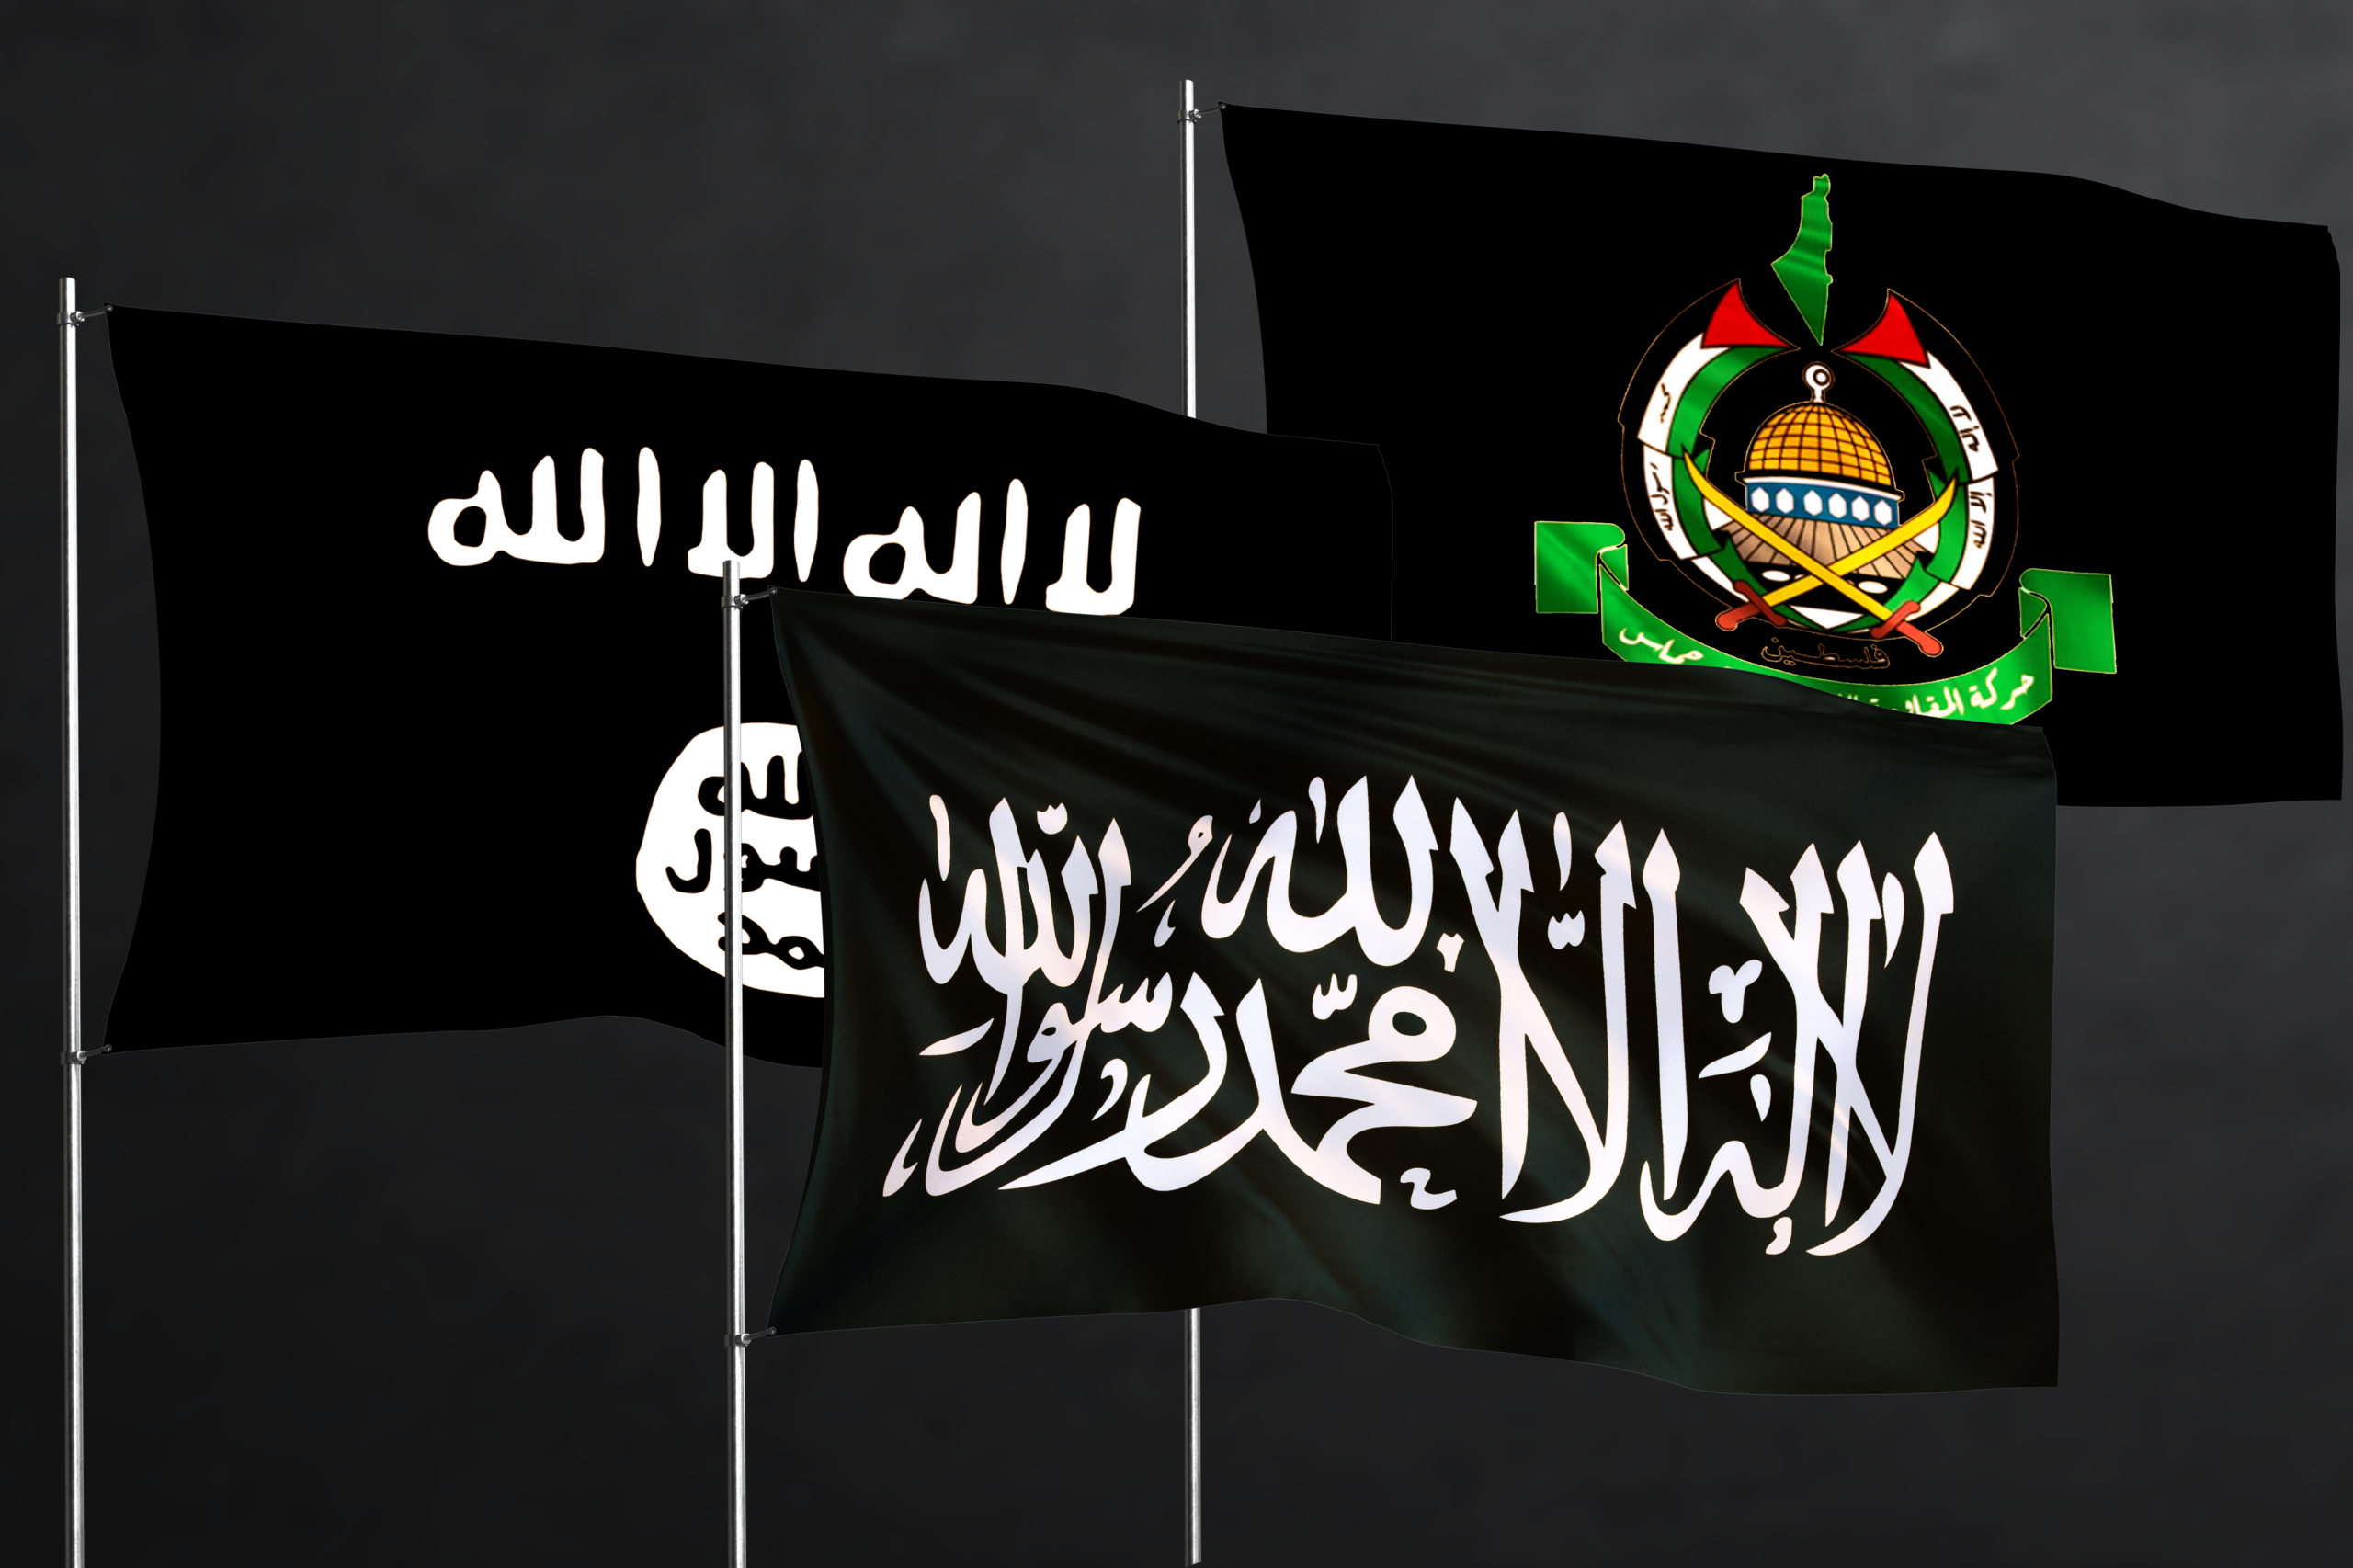 Flags of terrorist organizations, including ISIS and Hamas, on a dark background.